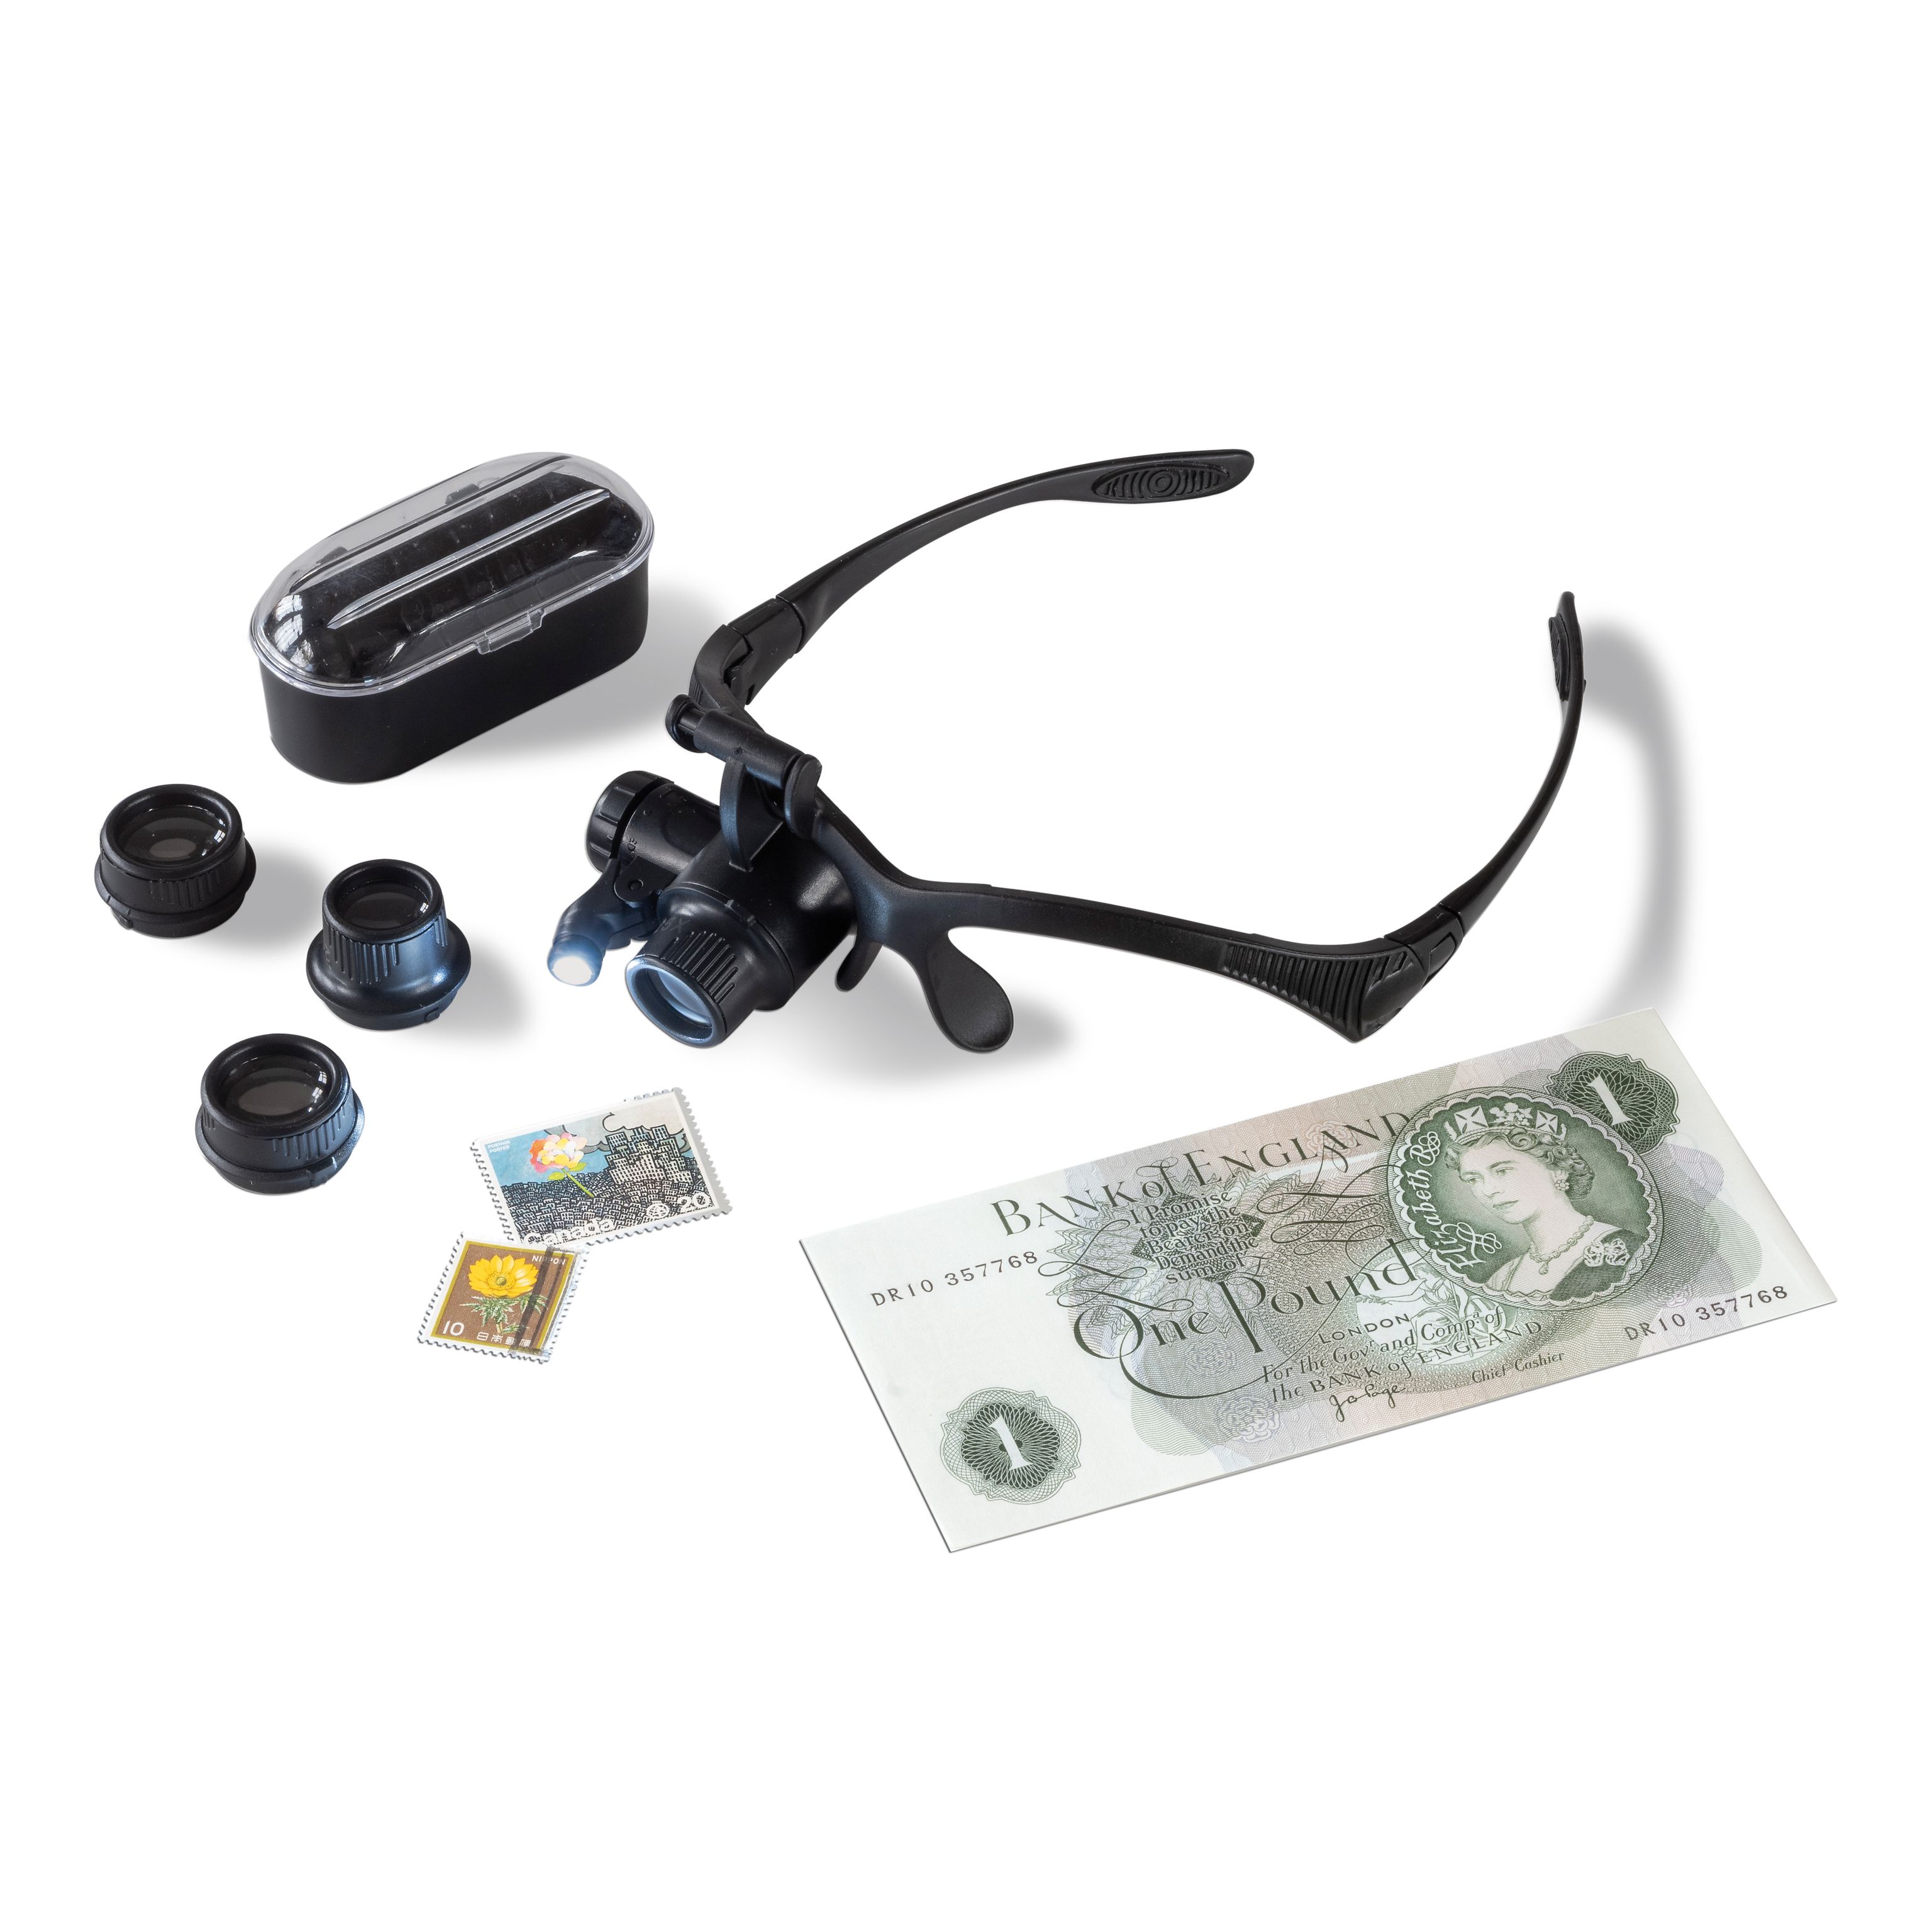 Dizekui Magnification Glasses With Powerful Led Light